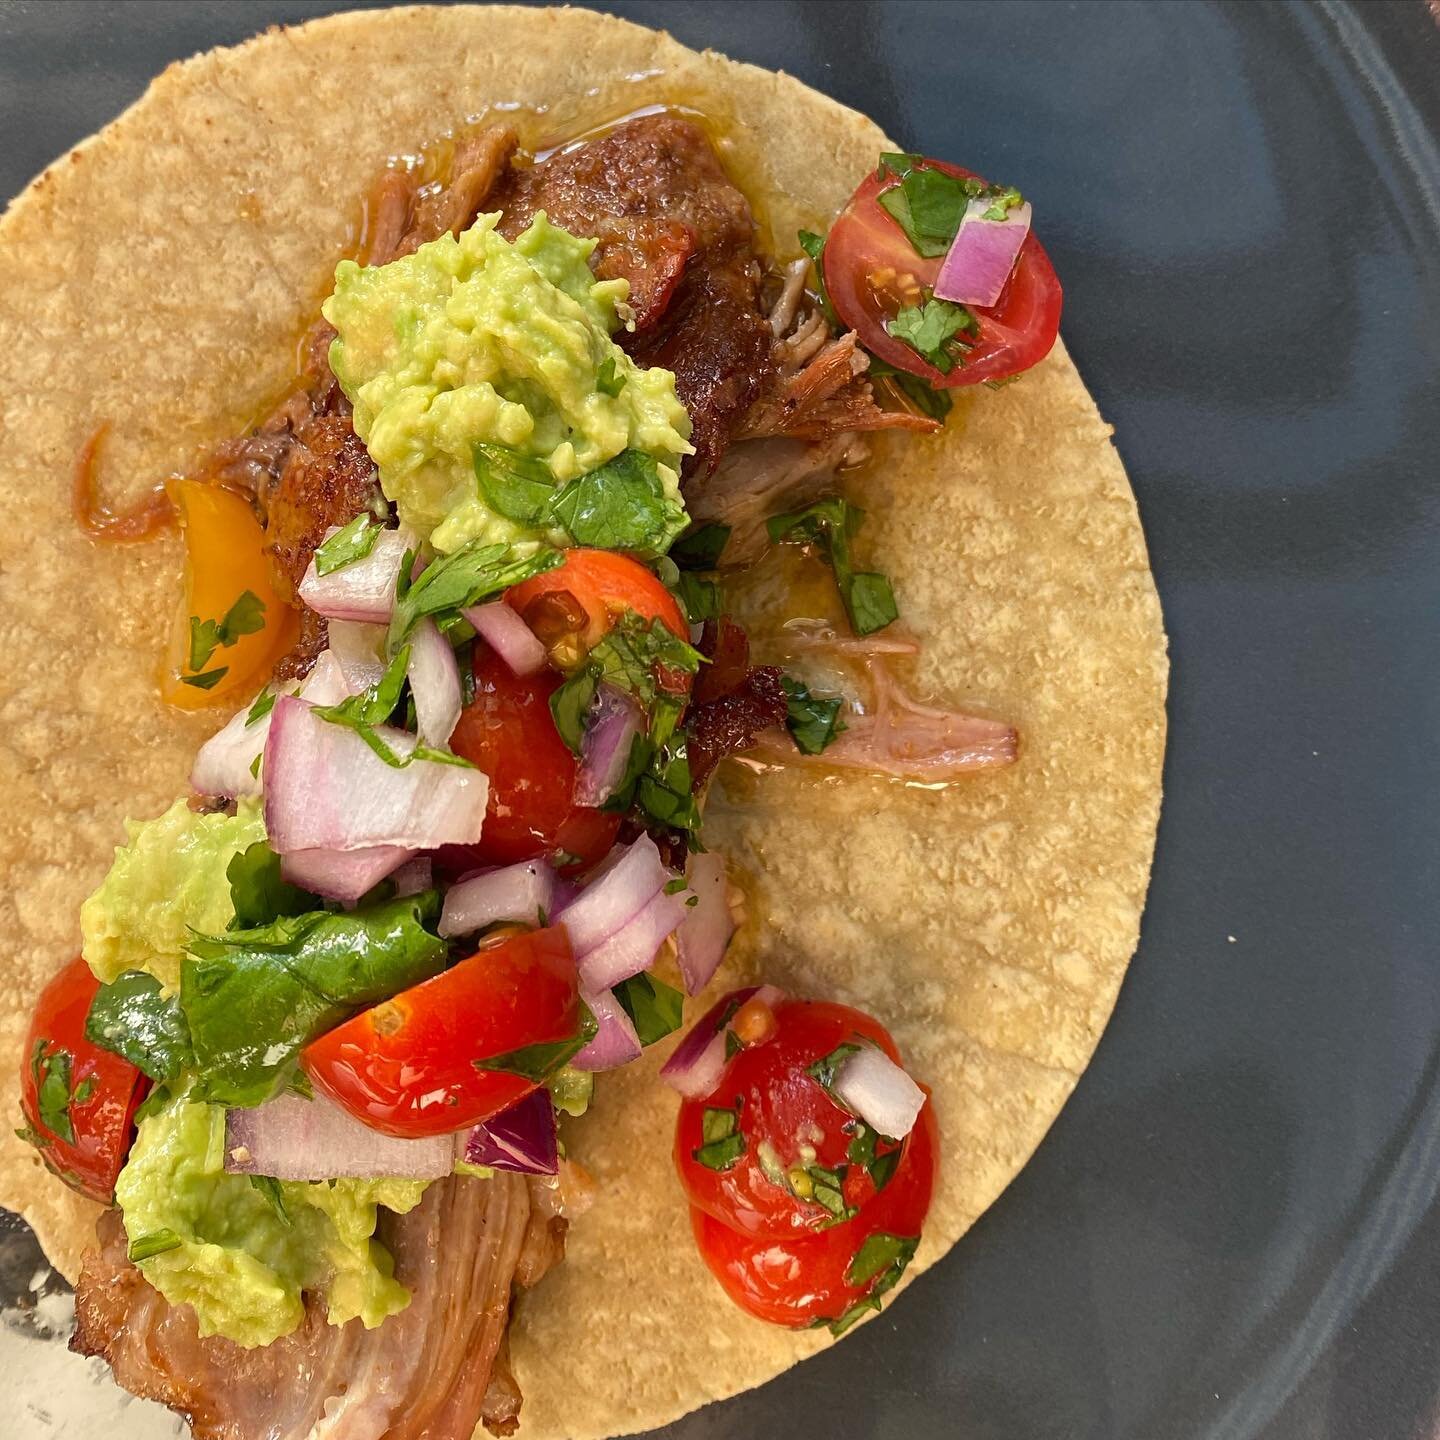 🌮Father&rsquo;s Day Carnitas 🌮 Something I have wanted to road test for a while after seeing the recipe on @joshuaweissman&rsquo;s YouTube and again when @cass_amundsen shared her recipe.

Slow braised pork shoulder/butt using spices (Smokey paprik